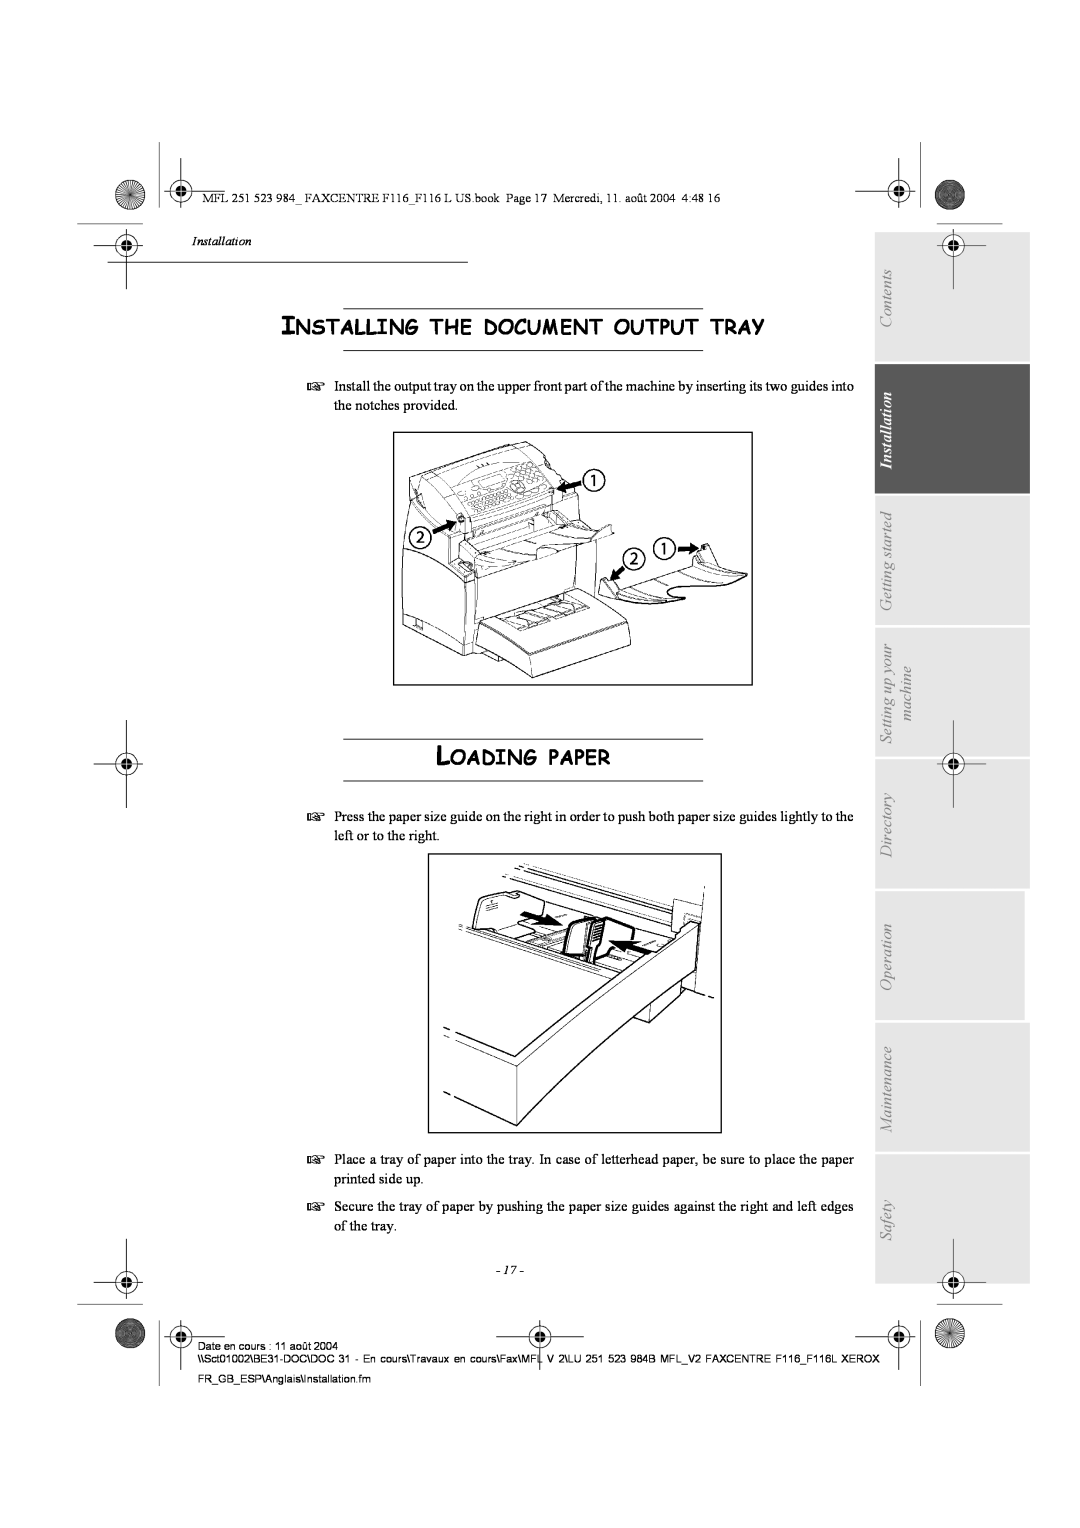 Xerox F116 user manual Installing The Document Output Tray, Loading Paper, Installation 